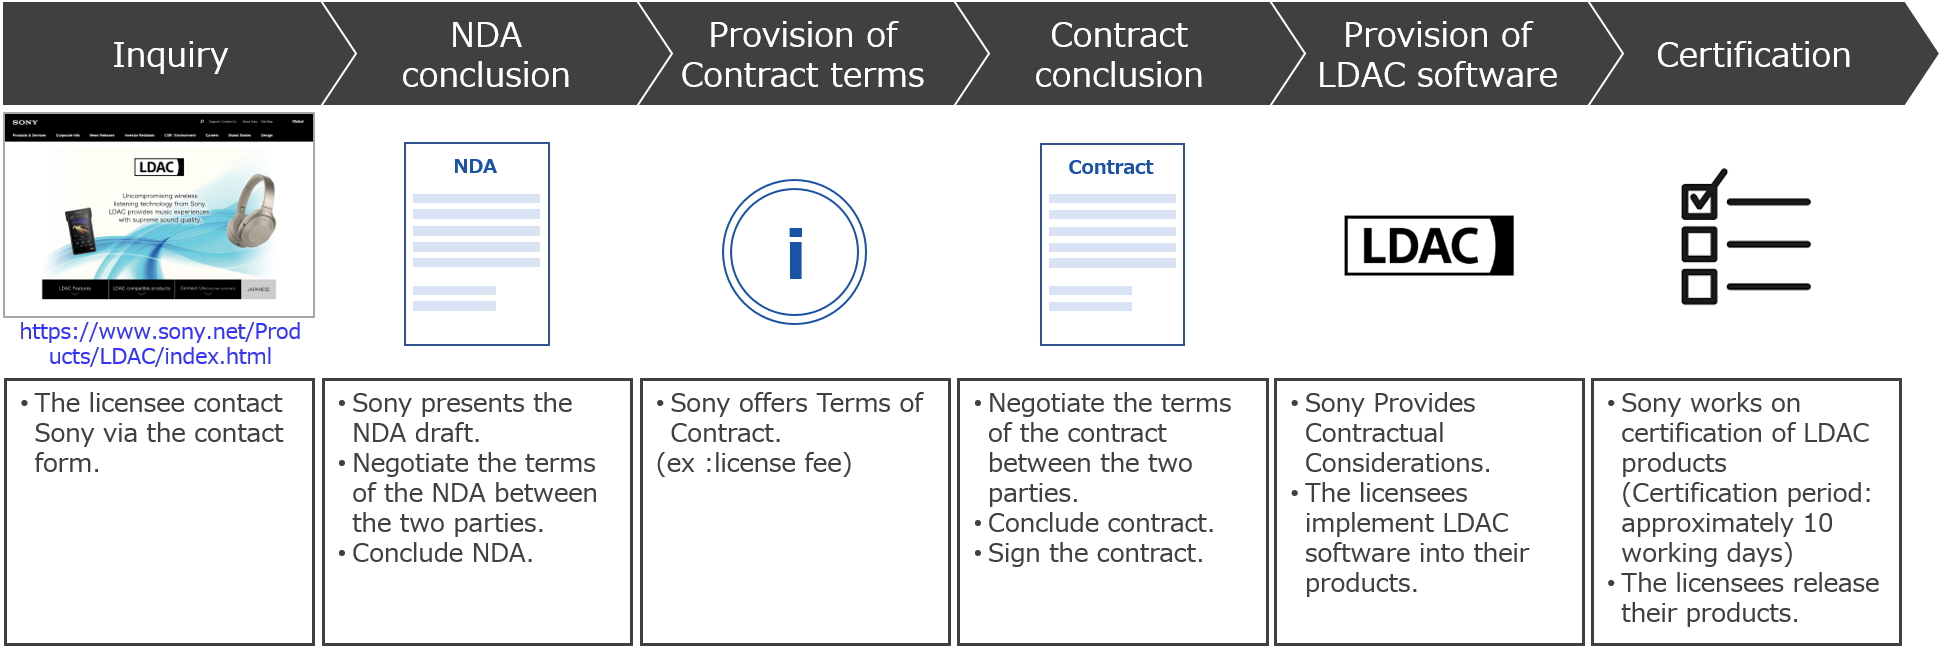 Inquiry→NDA conclusion→Provision of Contract terms→Contract conclusion→Provision of LDAC software→Certification